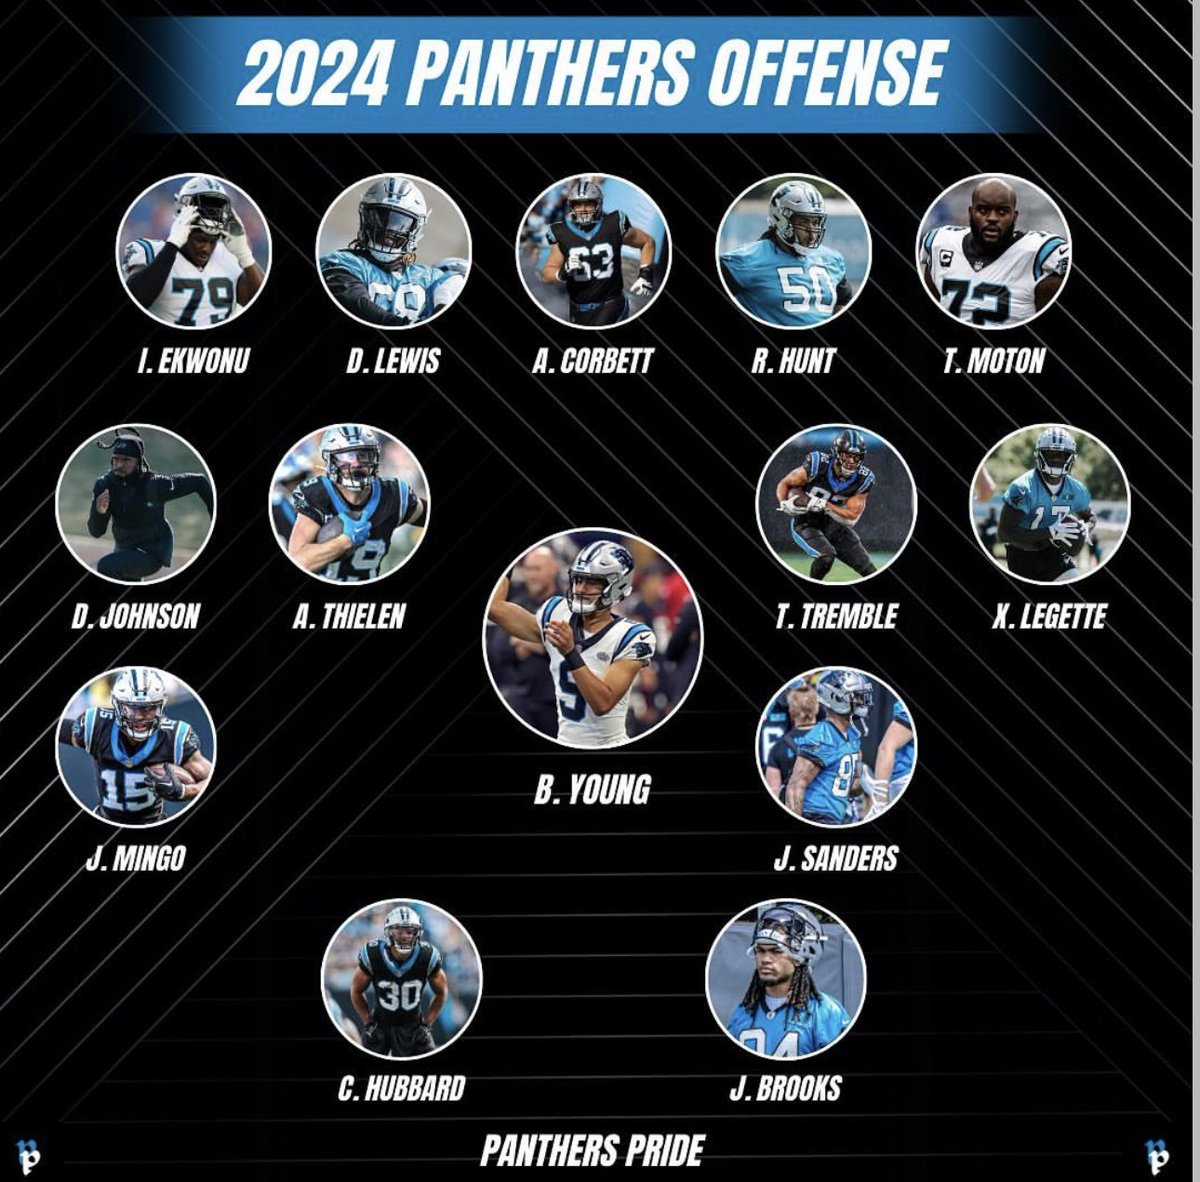 how we feelin about the offense this year? 

pic cred to pantherspride on IG

#keeppounding💙🖤